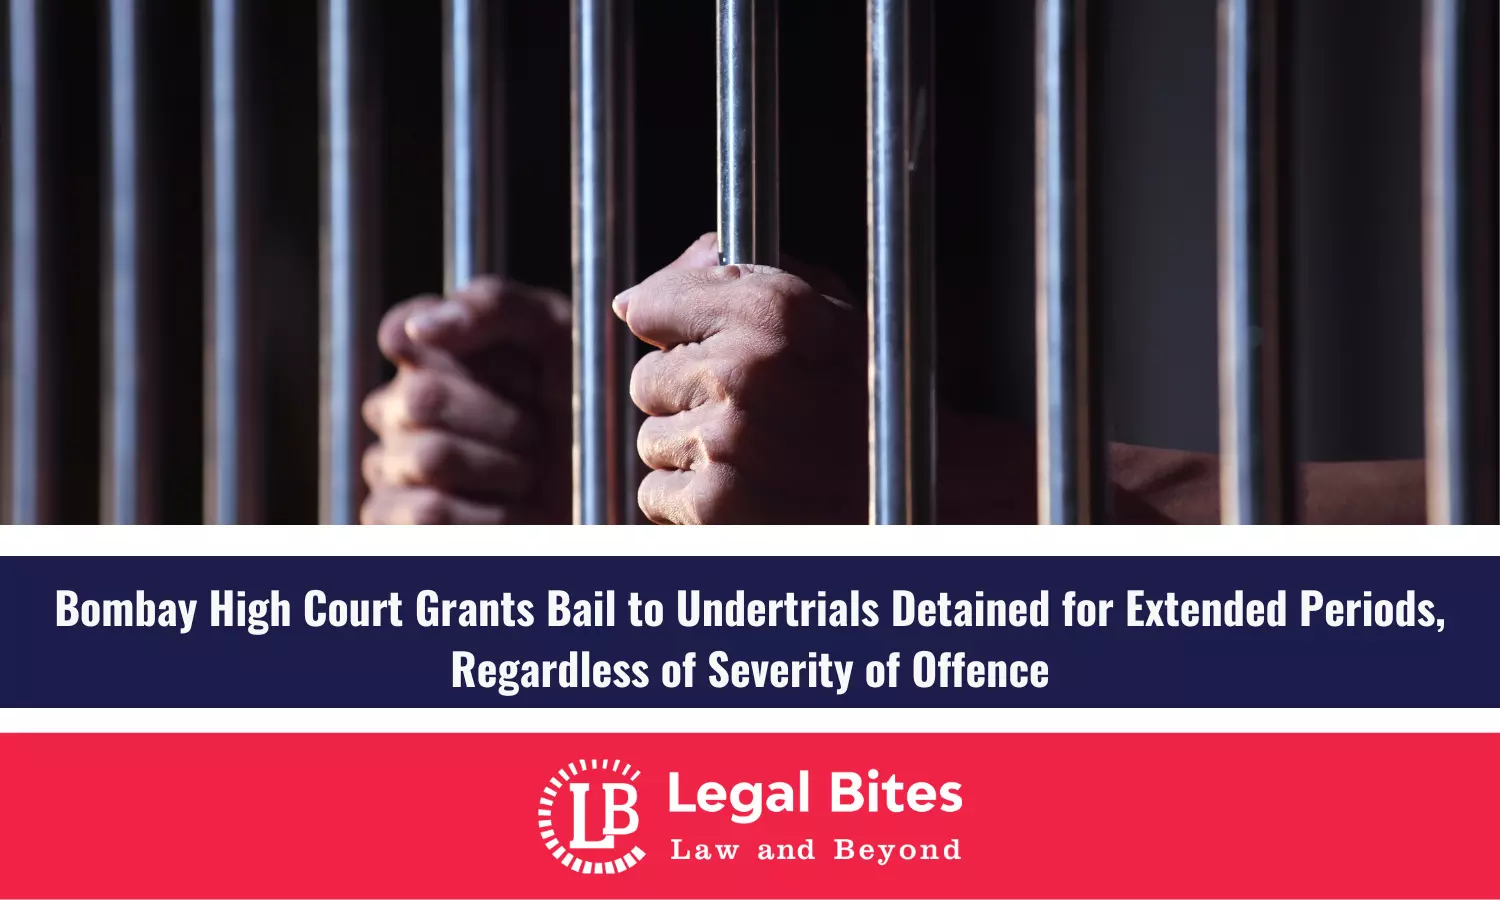 Bombay High Court Grants Bail to Undertrials Detained for Extended Periods, Regardless of Severity of Offence